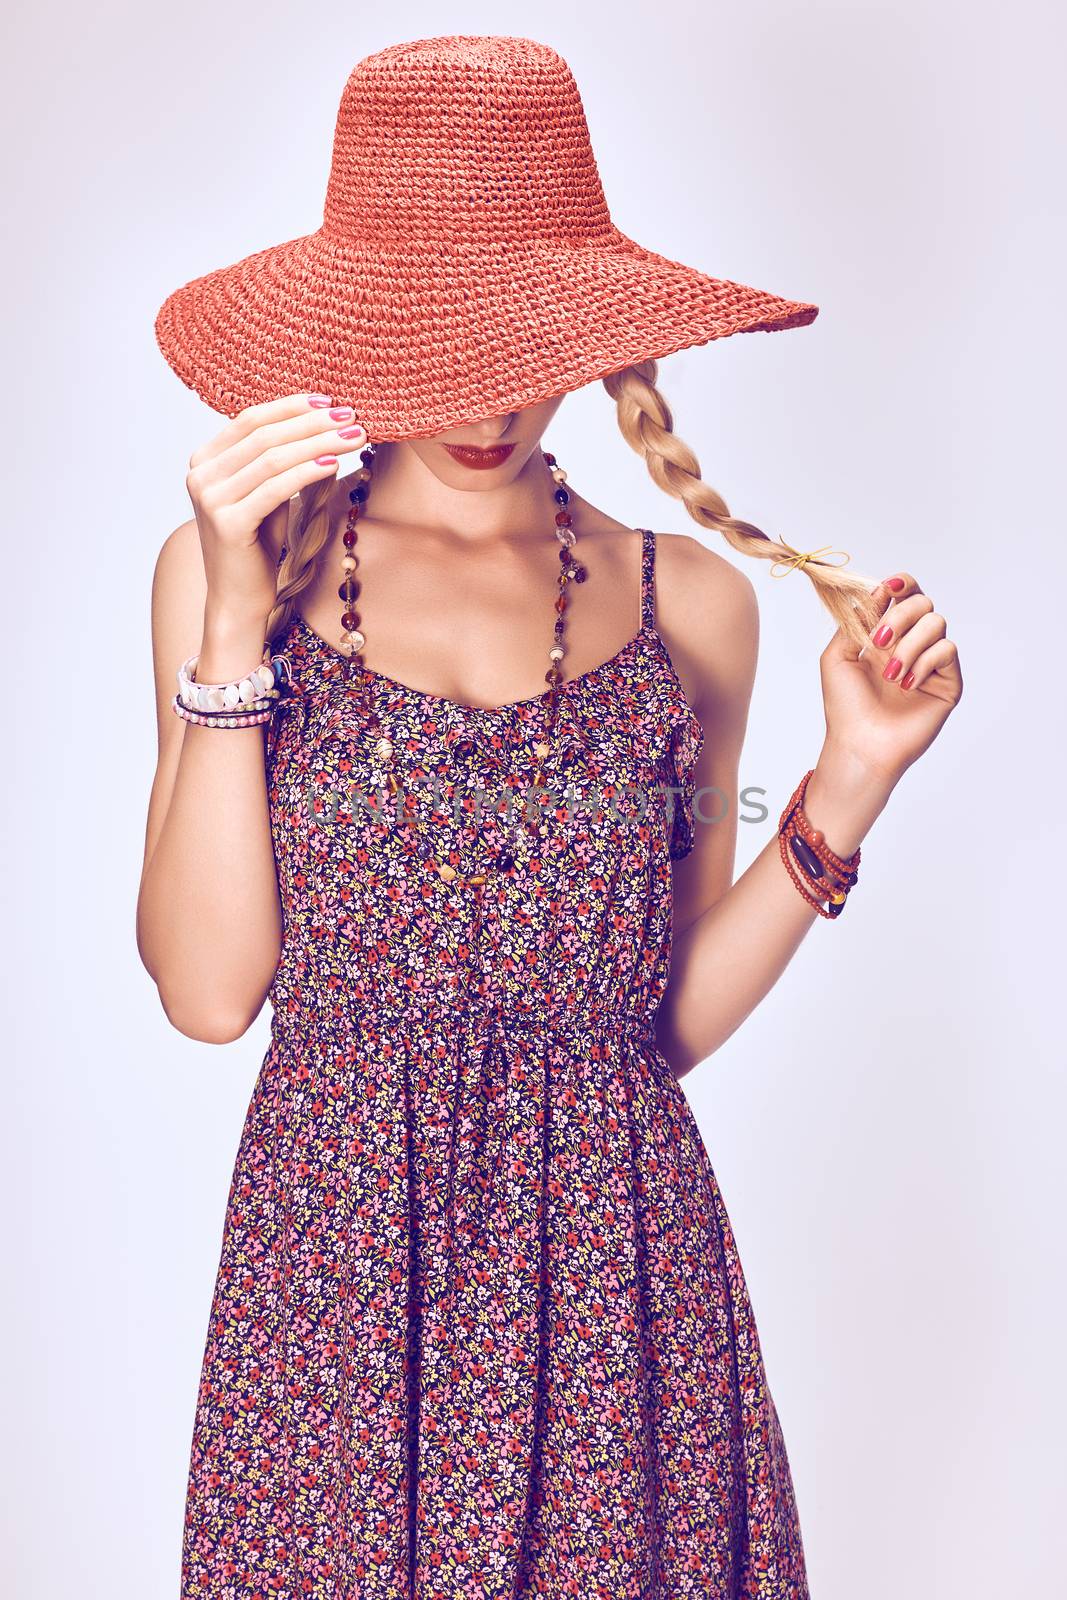 Hippie boho playful woman in hat.Relax, having fun by 918